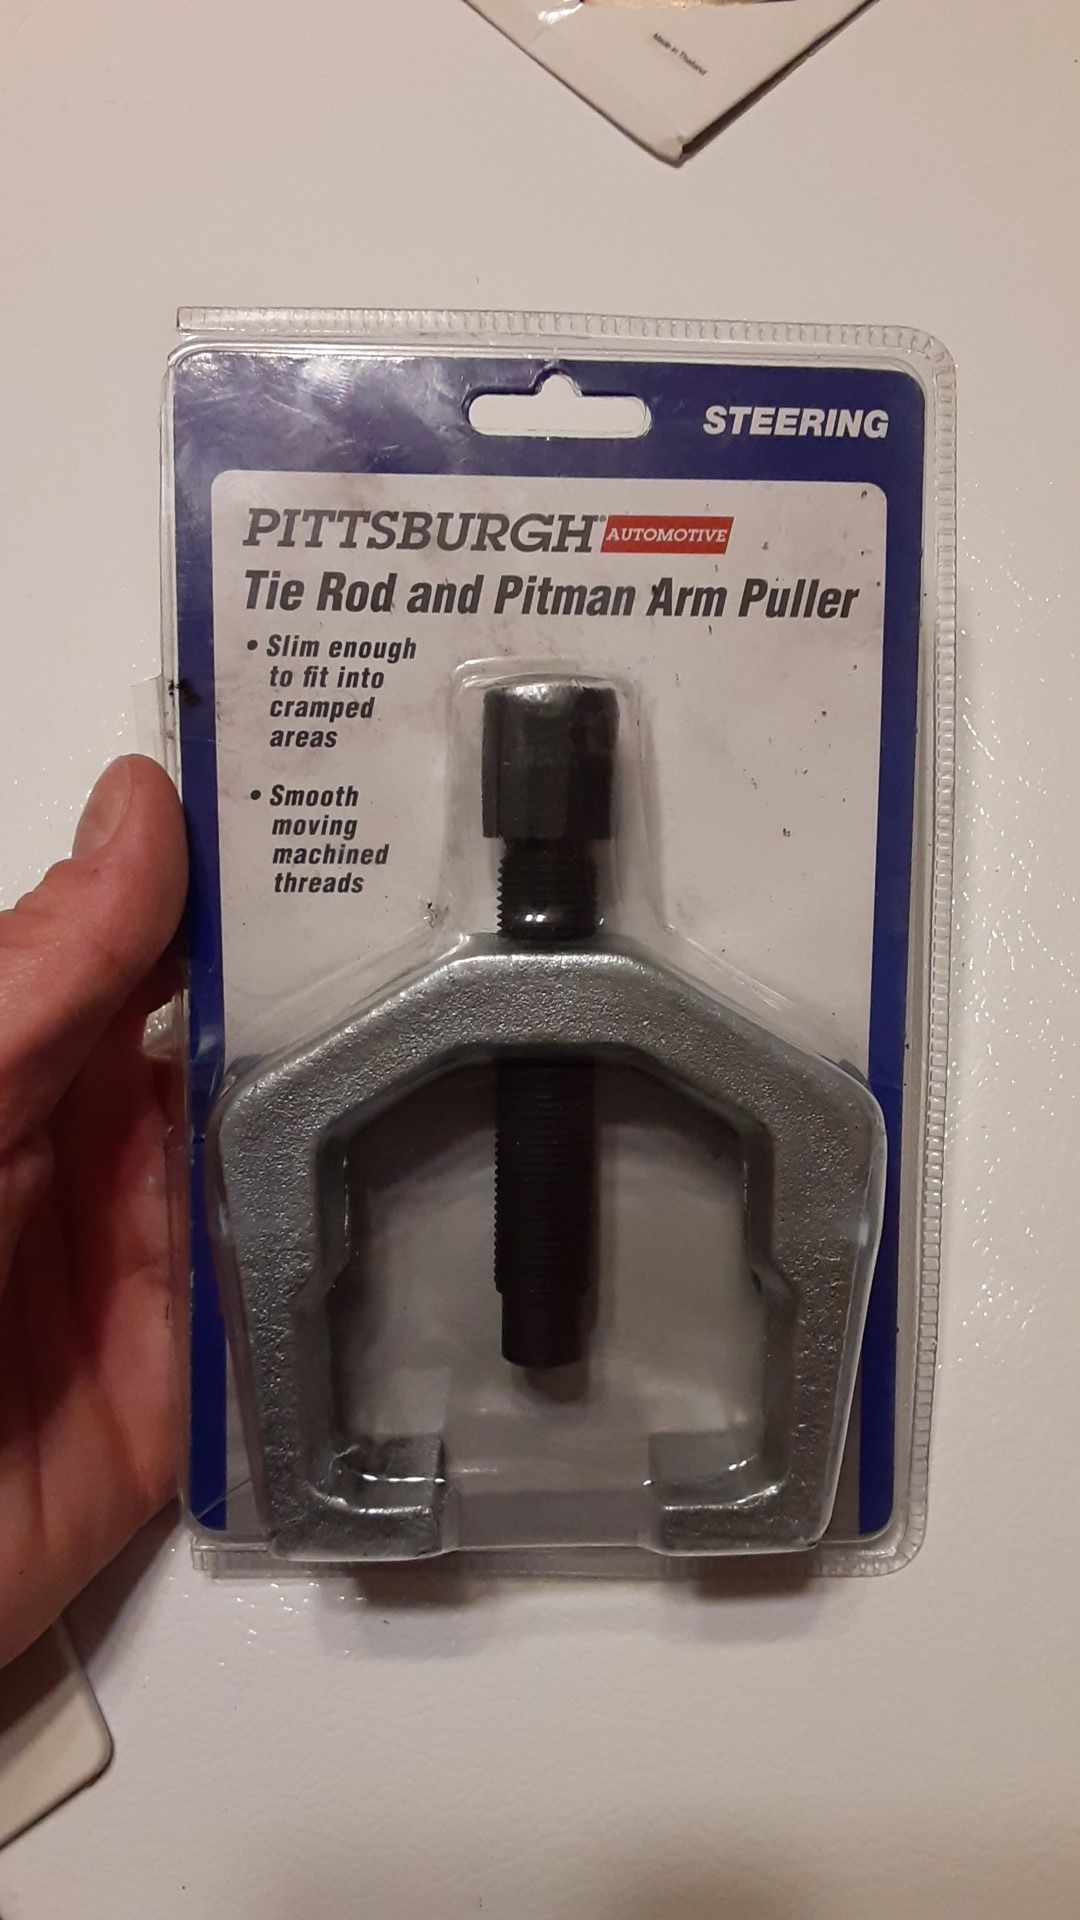 PITTSBURGH AUTOMOTIVE Tie Rod And Pitman Arm Puller